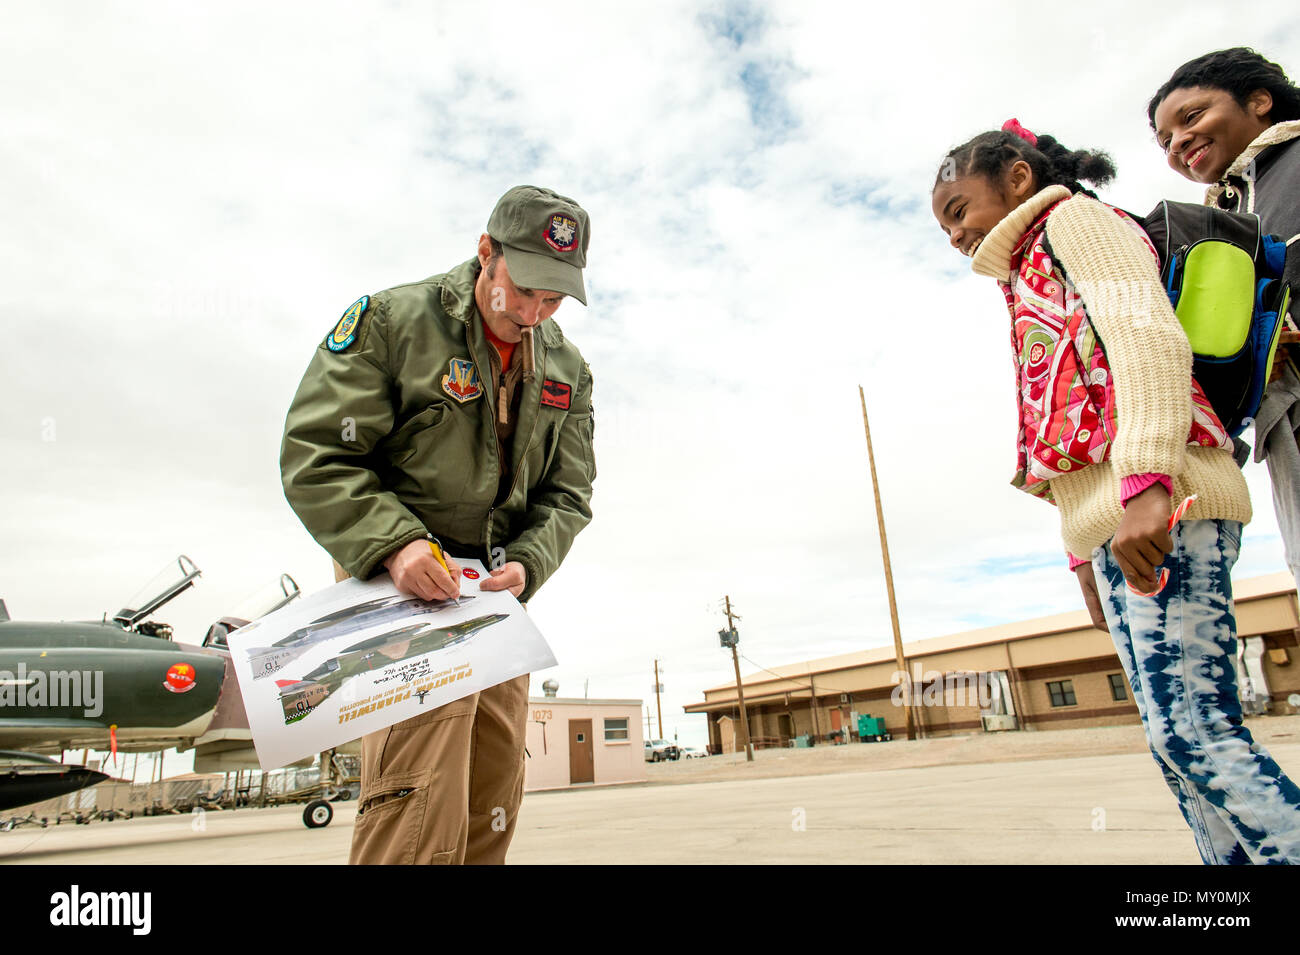 Civilian QF-4E Pilot/Controller Lt. Col. (Ret) Jim “WAM” Harkins, signs a poster for F-4 fans, after exiting his McDonnell Douglas F-4 Phantom II for last time on the final military flight of the storied aircraft at Holloman AFB, N.M., Dec. 21, 2016. The final variant of the Phantom II was the QF-4 unmanned aerial targets flown by the 82nd Aerial Target Squadron Detachment 1 at Holloman AFB. The ceremonial flight was Harkins last in a cockpit for the Air Force; he will now serve as a ground controller for the QF-4's replacement, the QF-16. The F-4 Phantom II entered the U.S. Air Force inventor Stock Photo